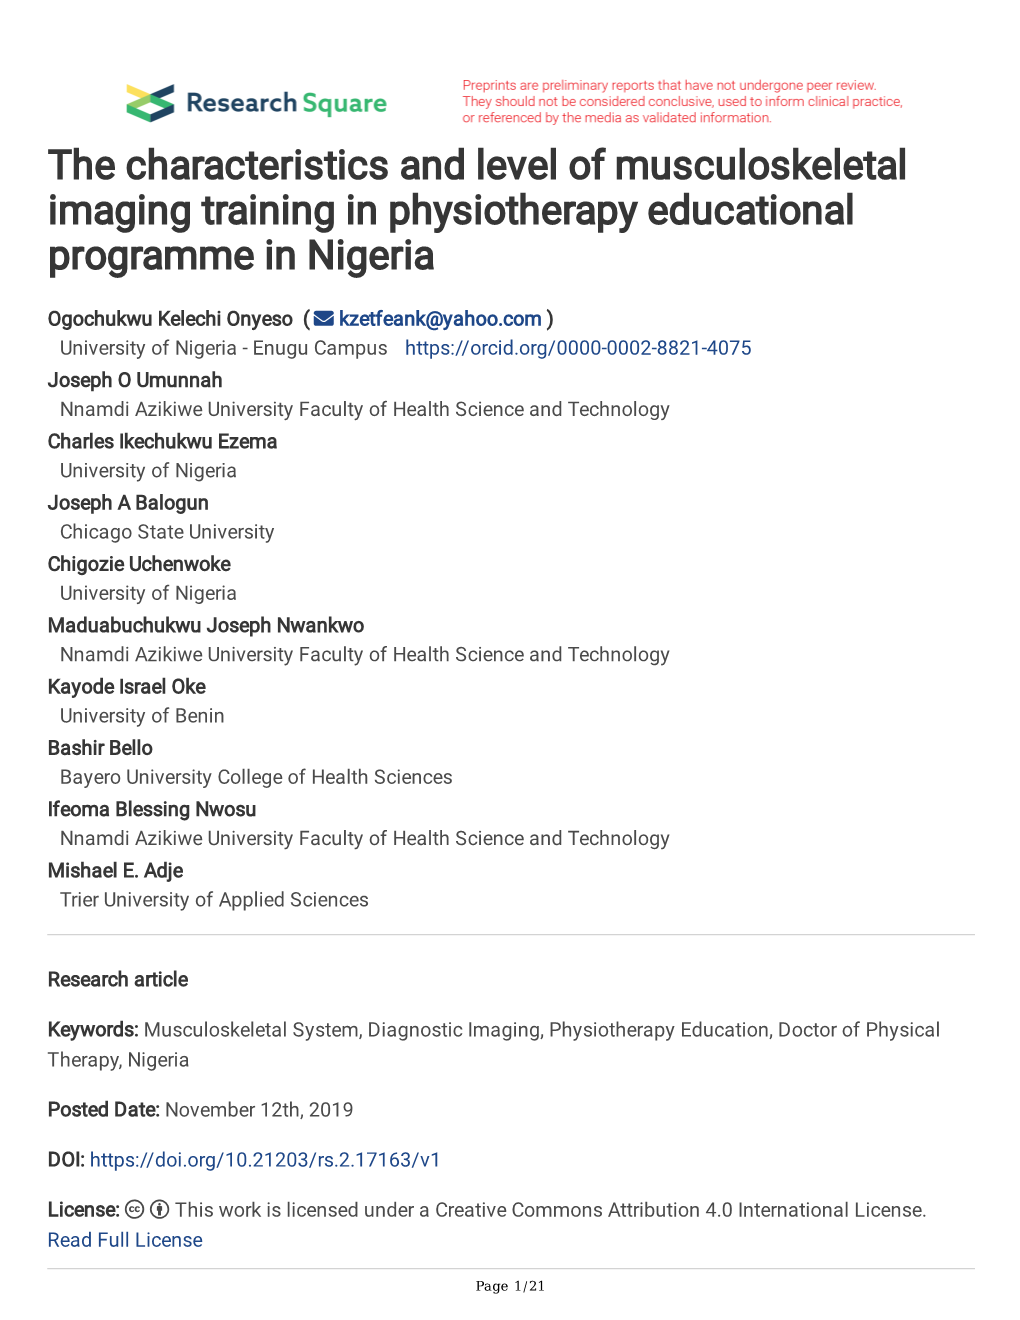 The Characteristics and Level of Musculoskeletal Imaging Training in Physiotherapy Educational Programme in Nigeria